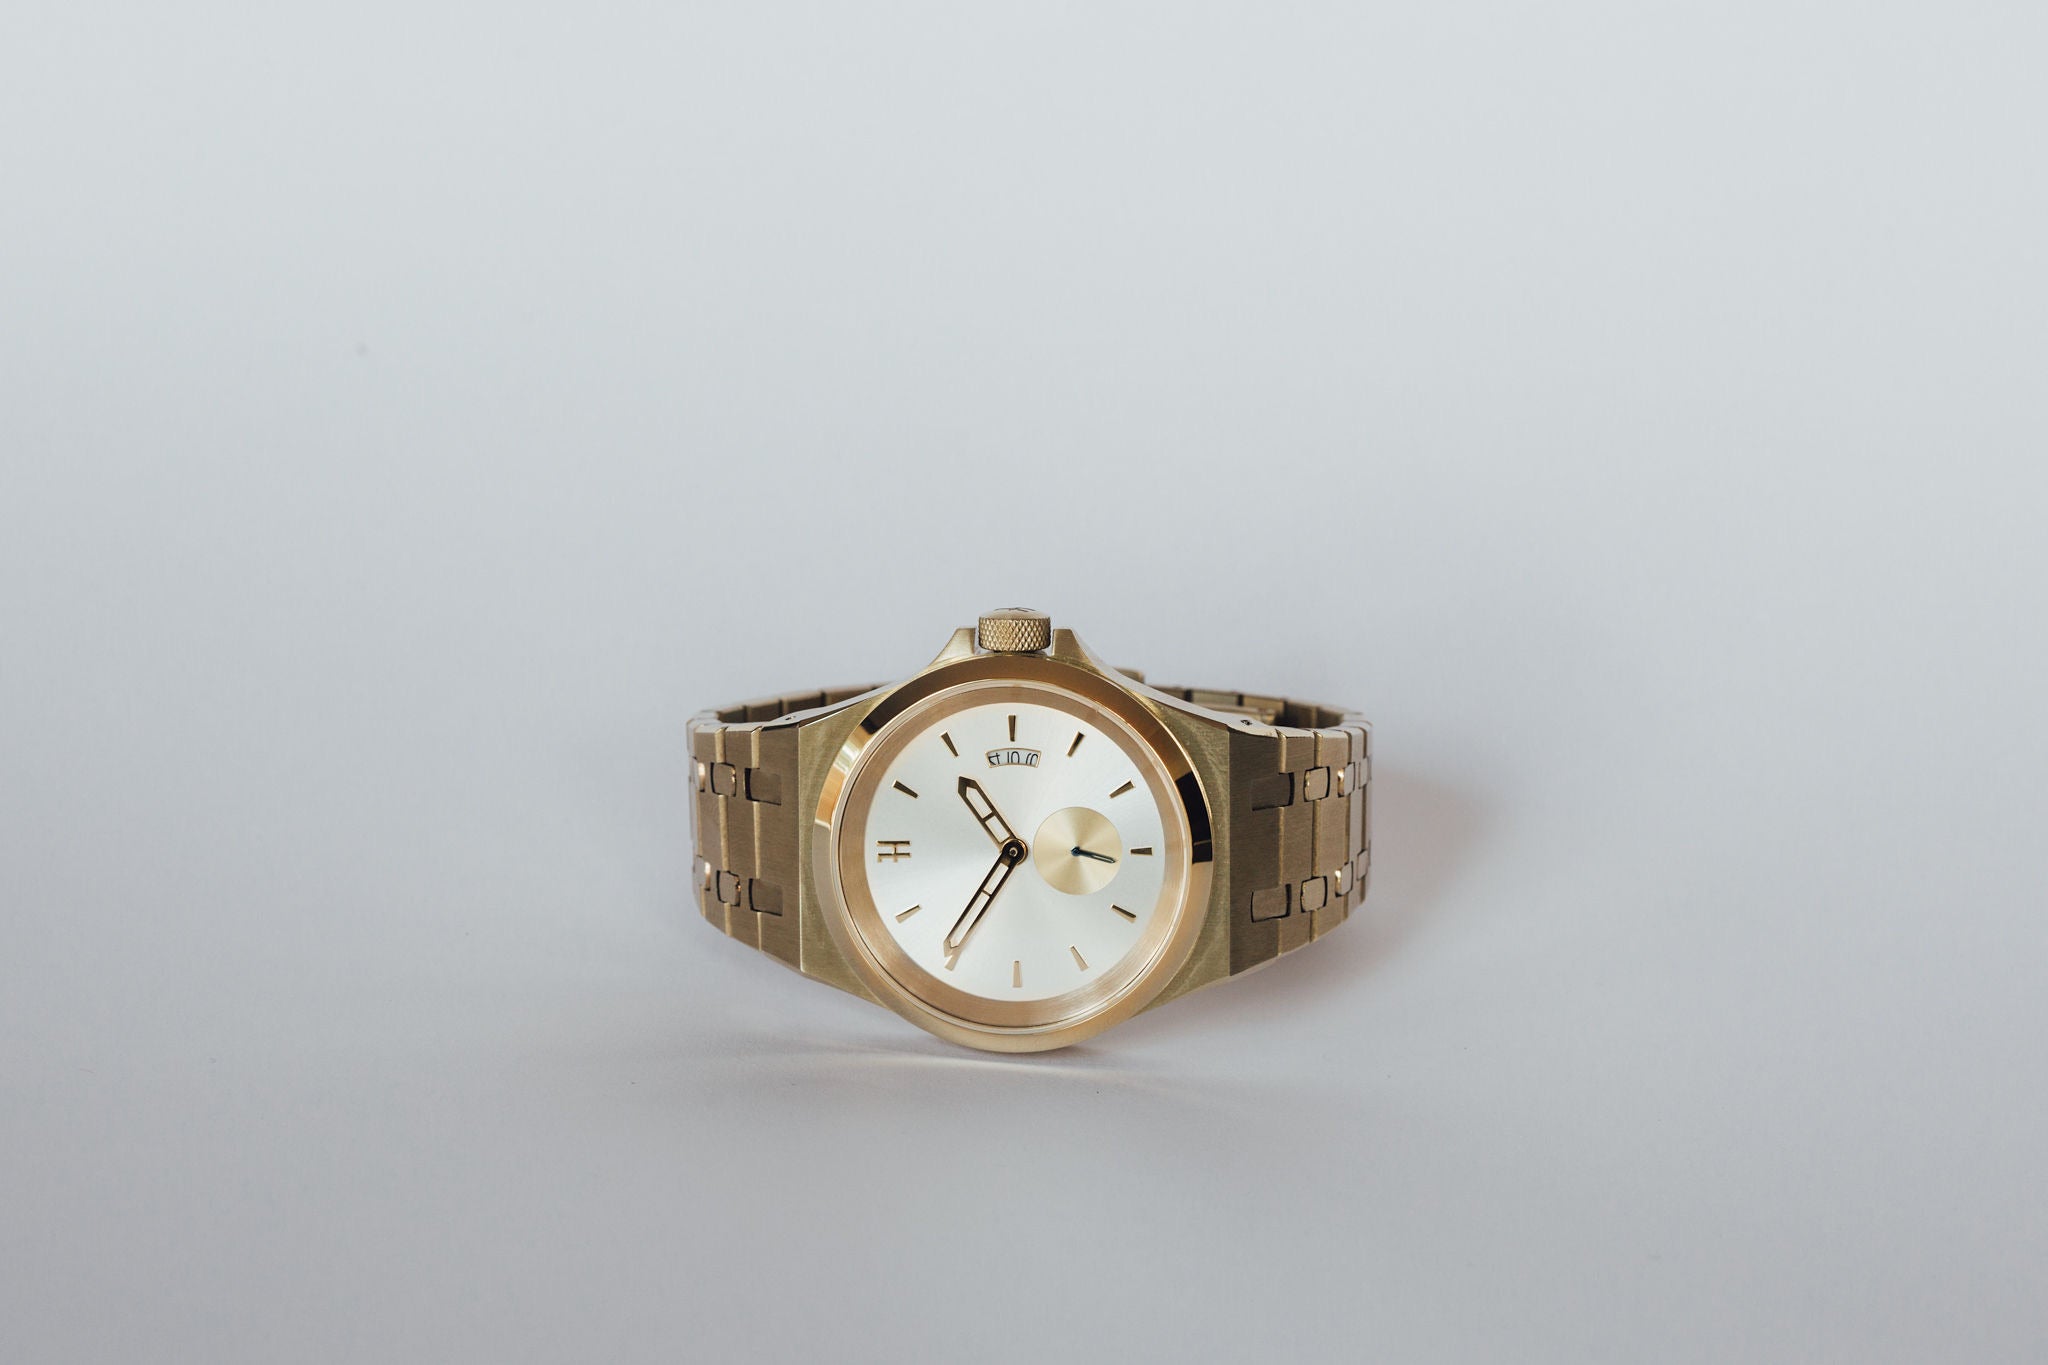 THE ACE - GOLD MENS WATCH